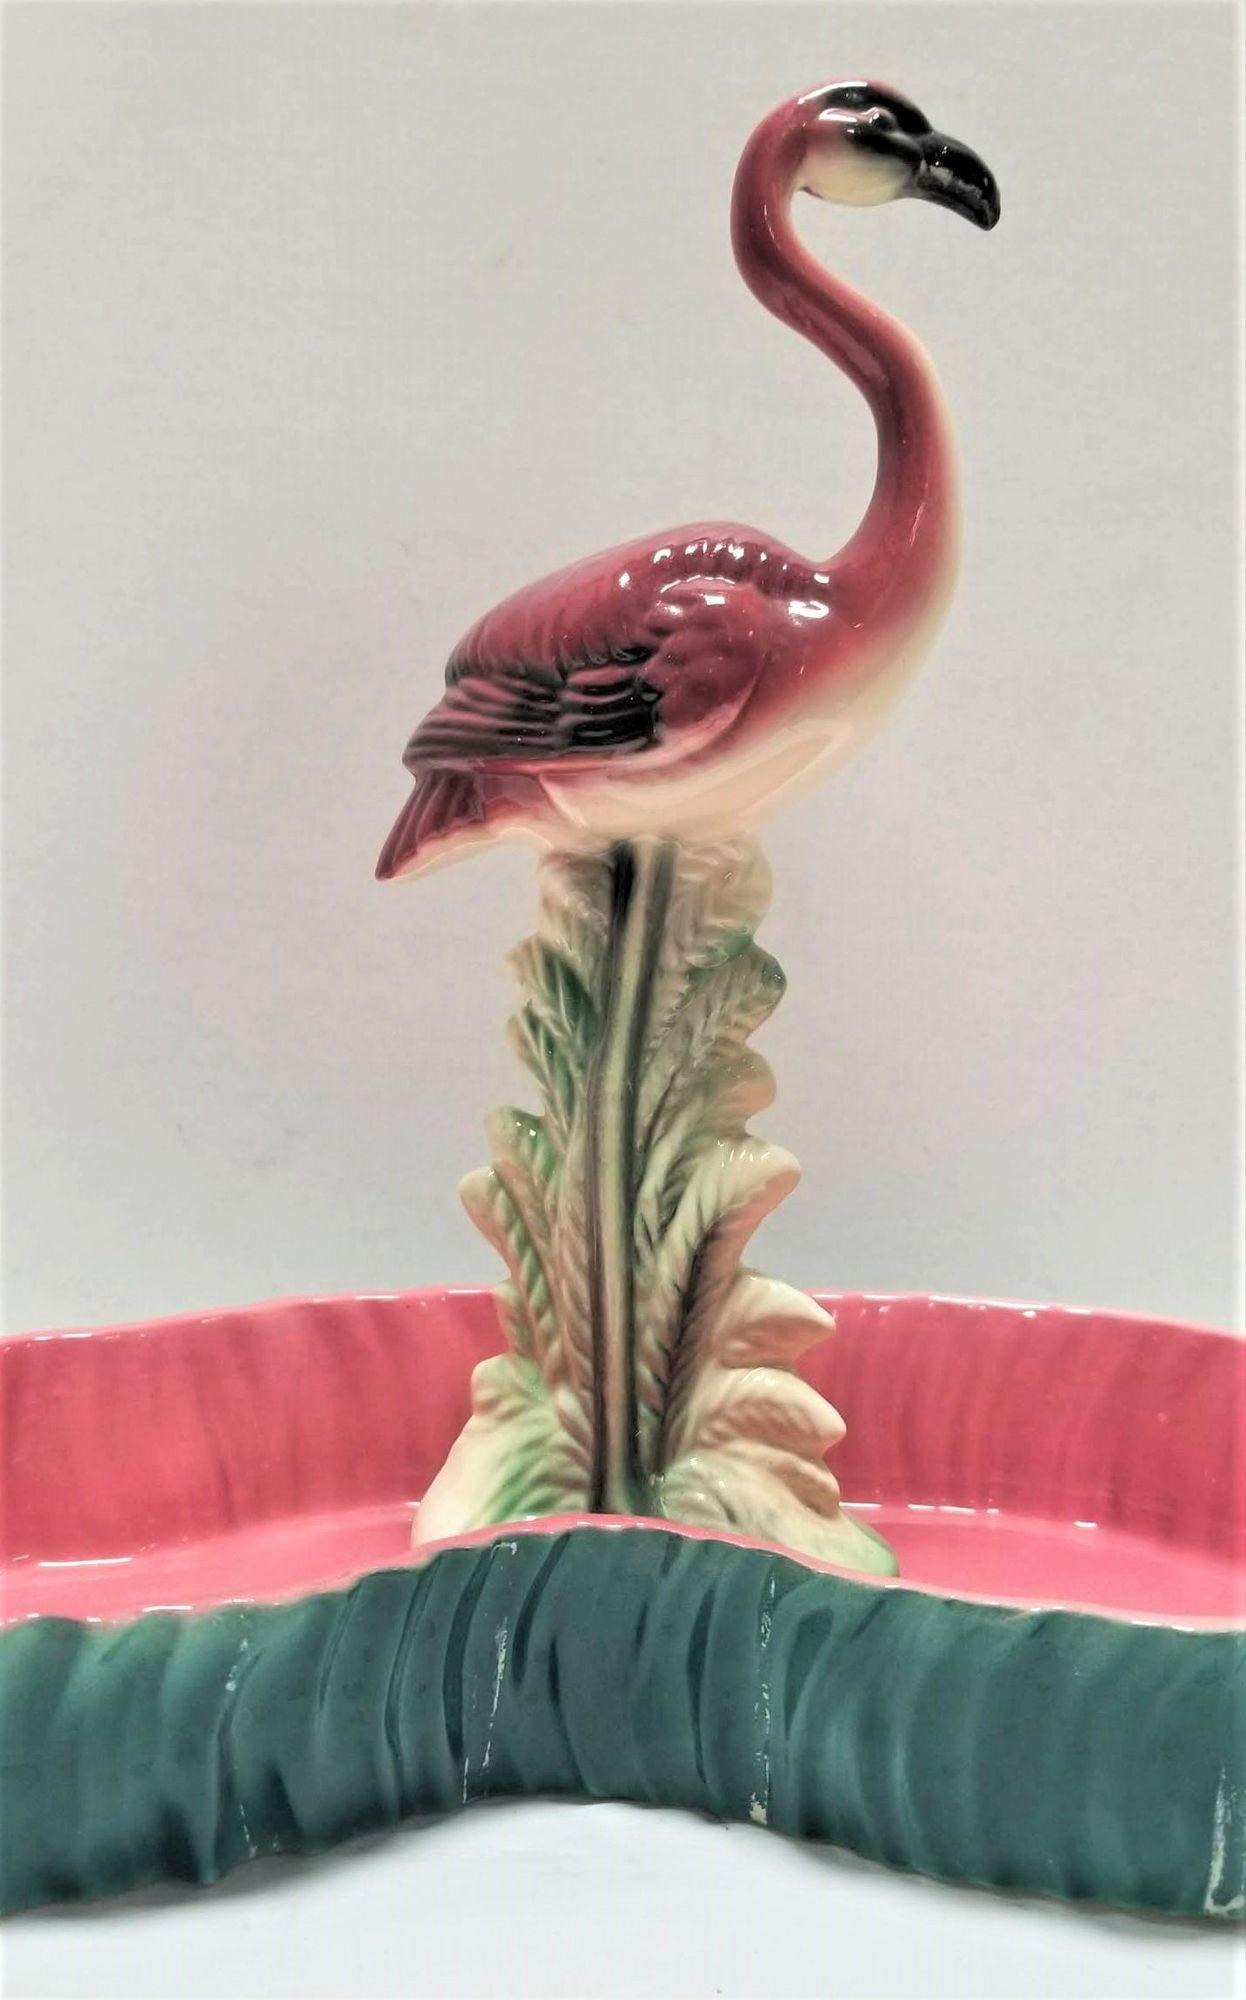 Midcentury pink and green flamingo ceramic figurine in flamingo pool tray decorative bowl.
Maddux of California was a ceramics company that operated in California from the 1930s to the 1970s. They produced a wide range of ceramic items, including